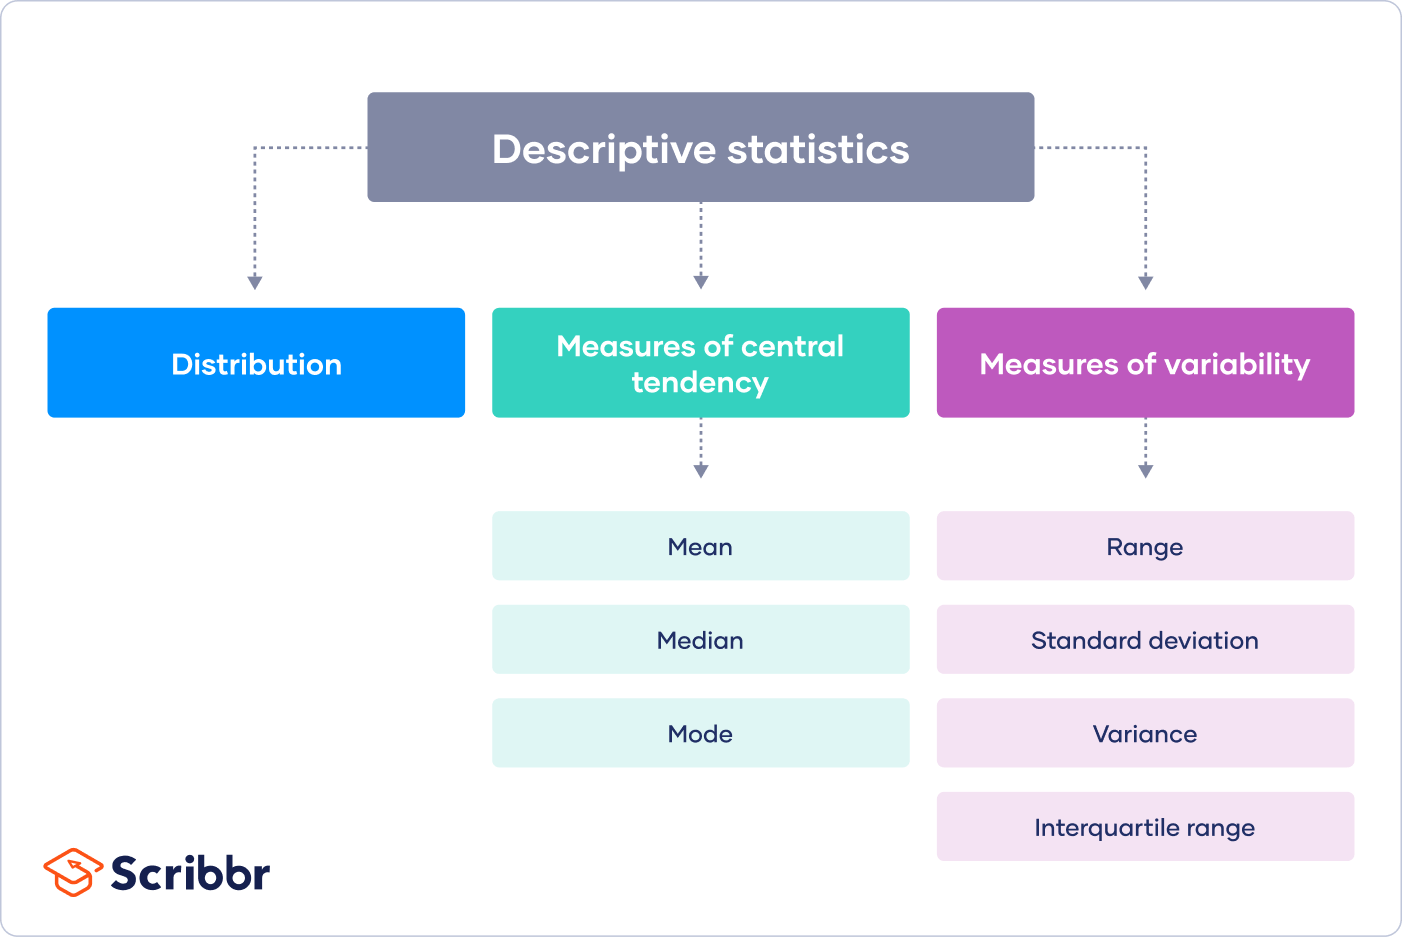 Statistical Analysis: Definition, How It Works, Importance